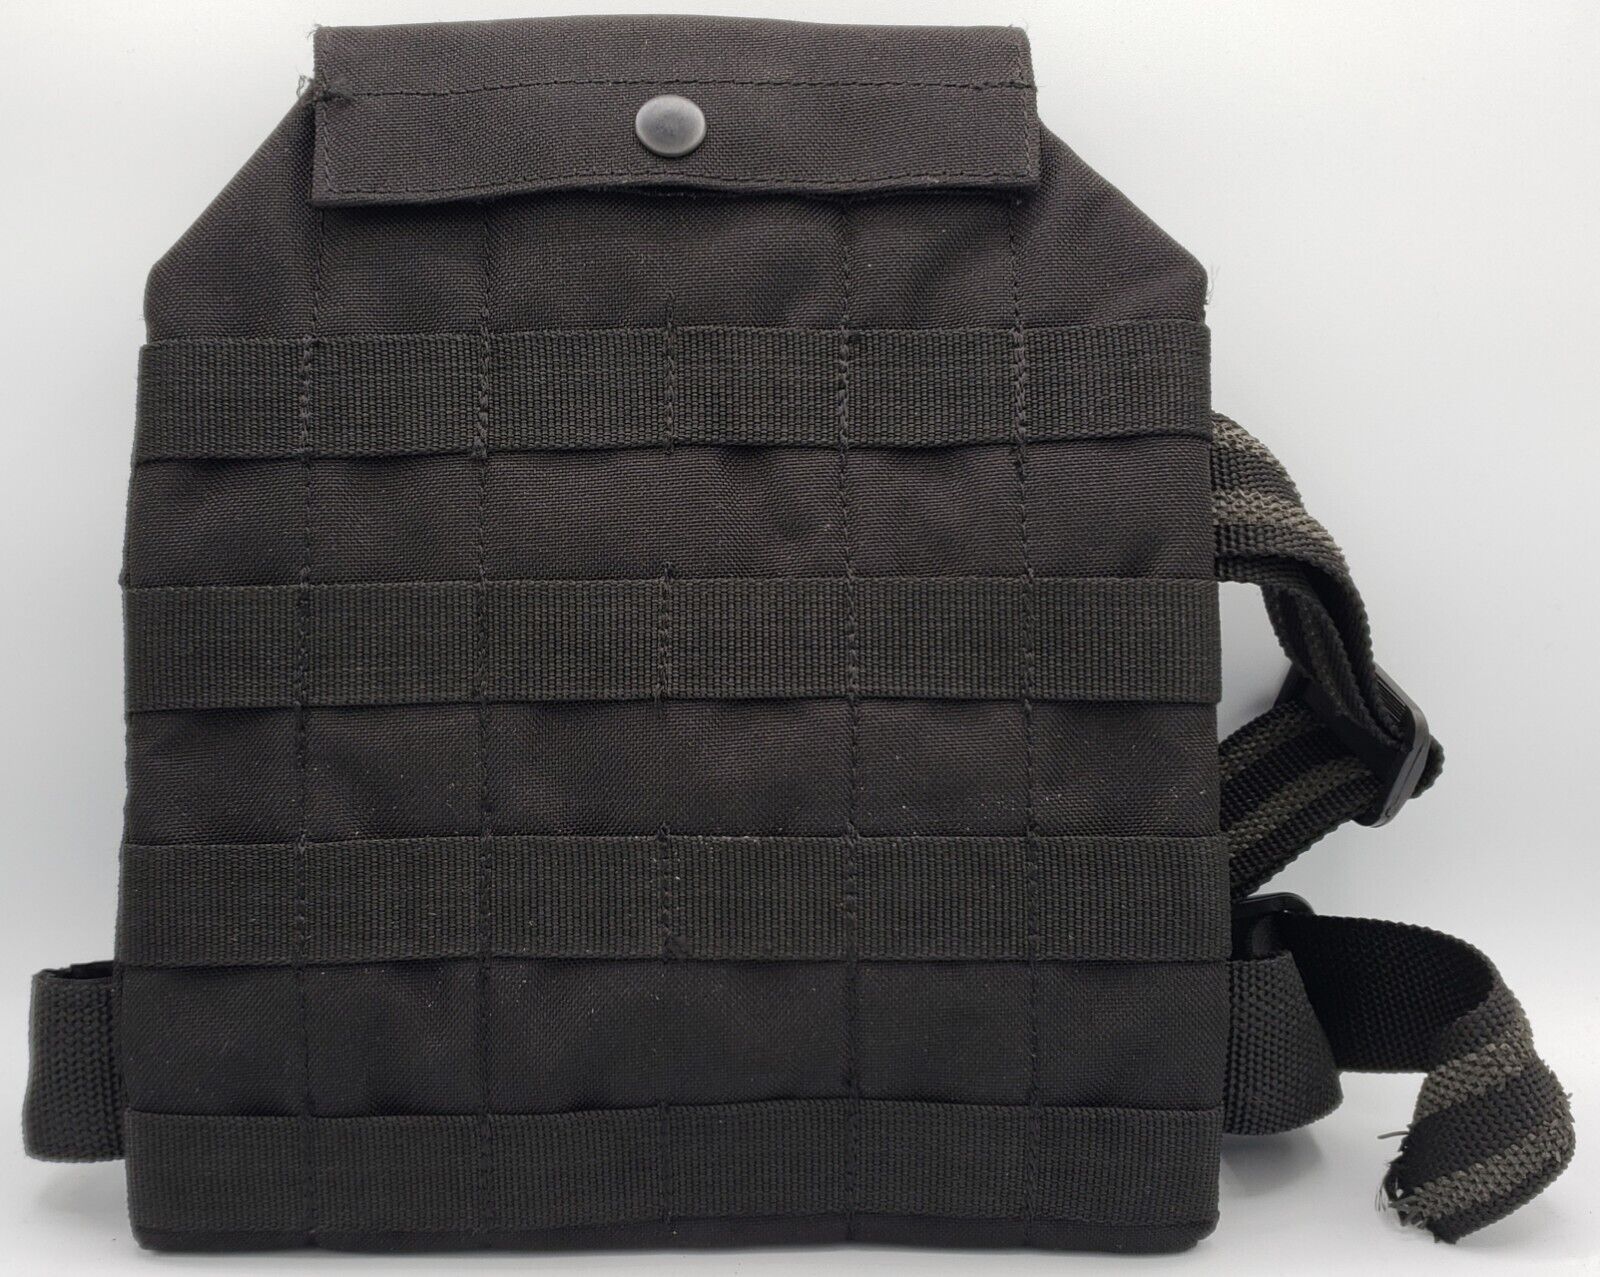 U.S. Military Tactical Molle Pouch Plate Holder Police Web Drop Down Thigh Leg 